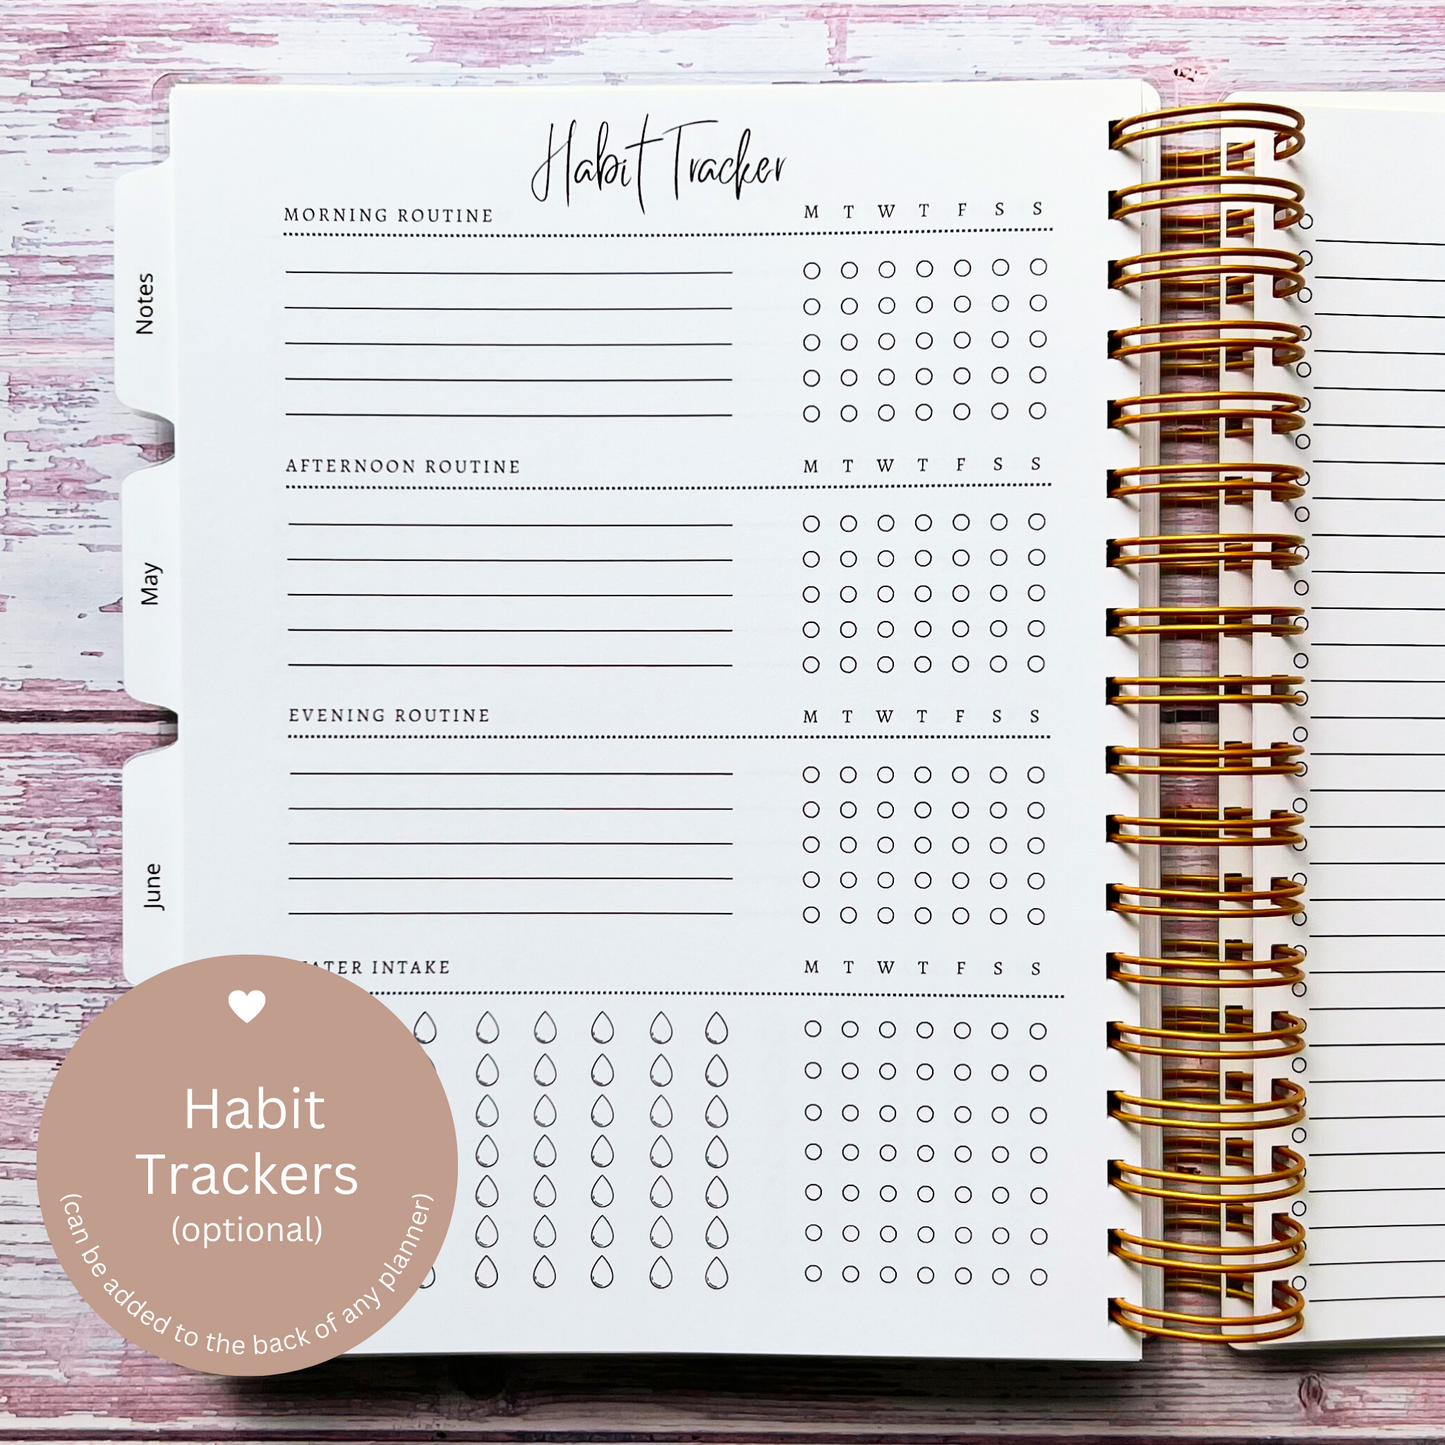 Personalized Weekly Planner | Be a Wildflower